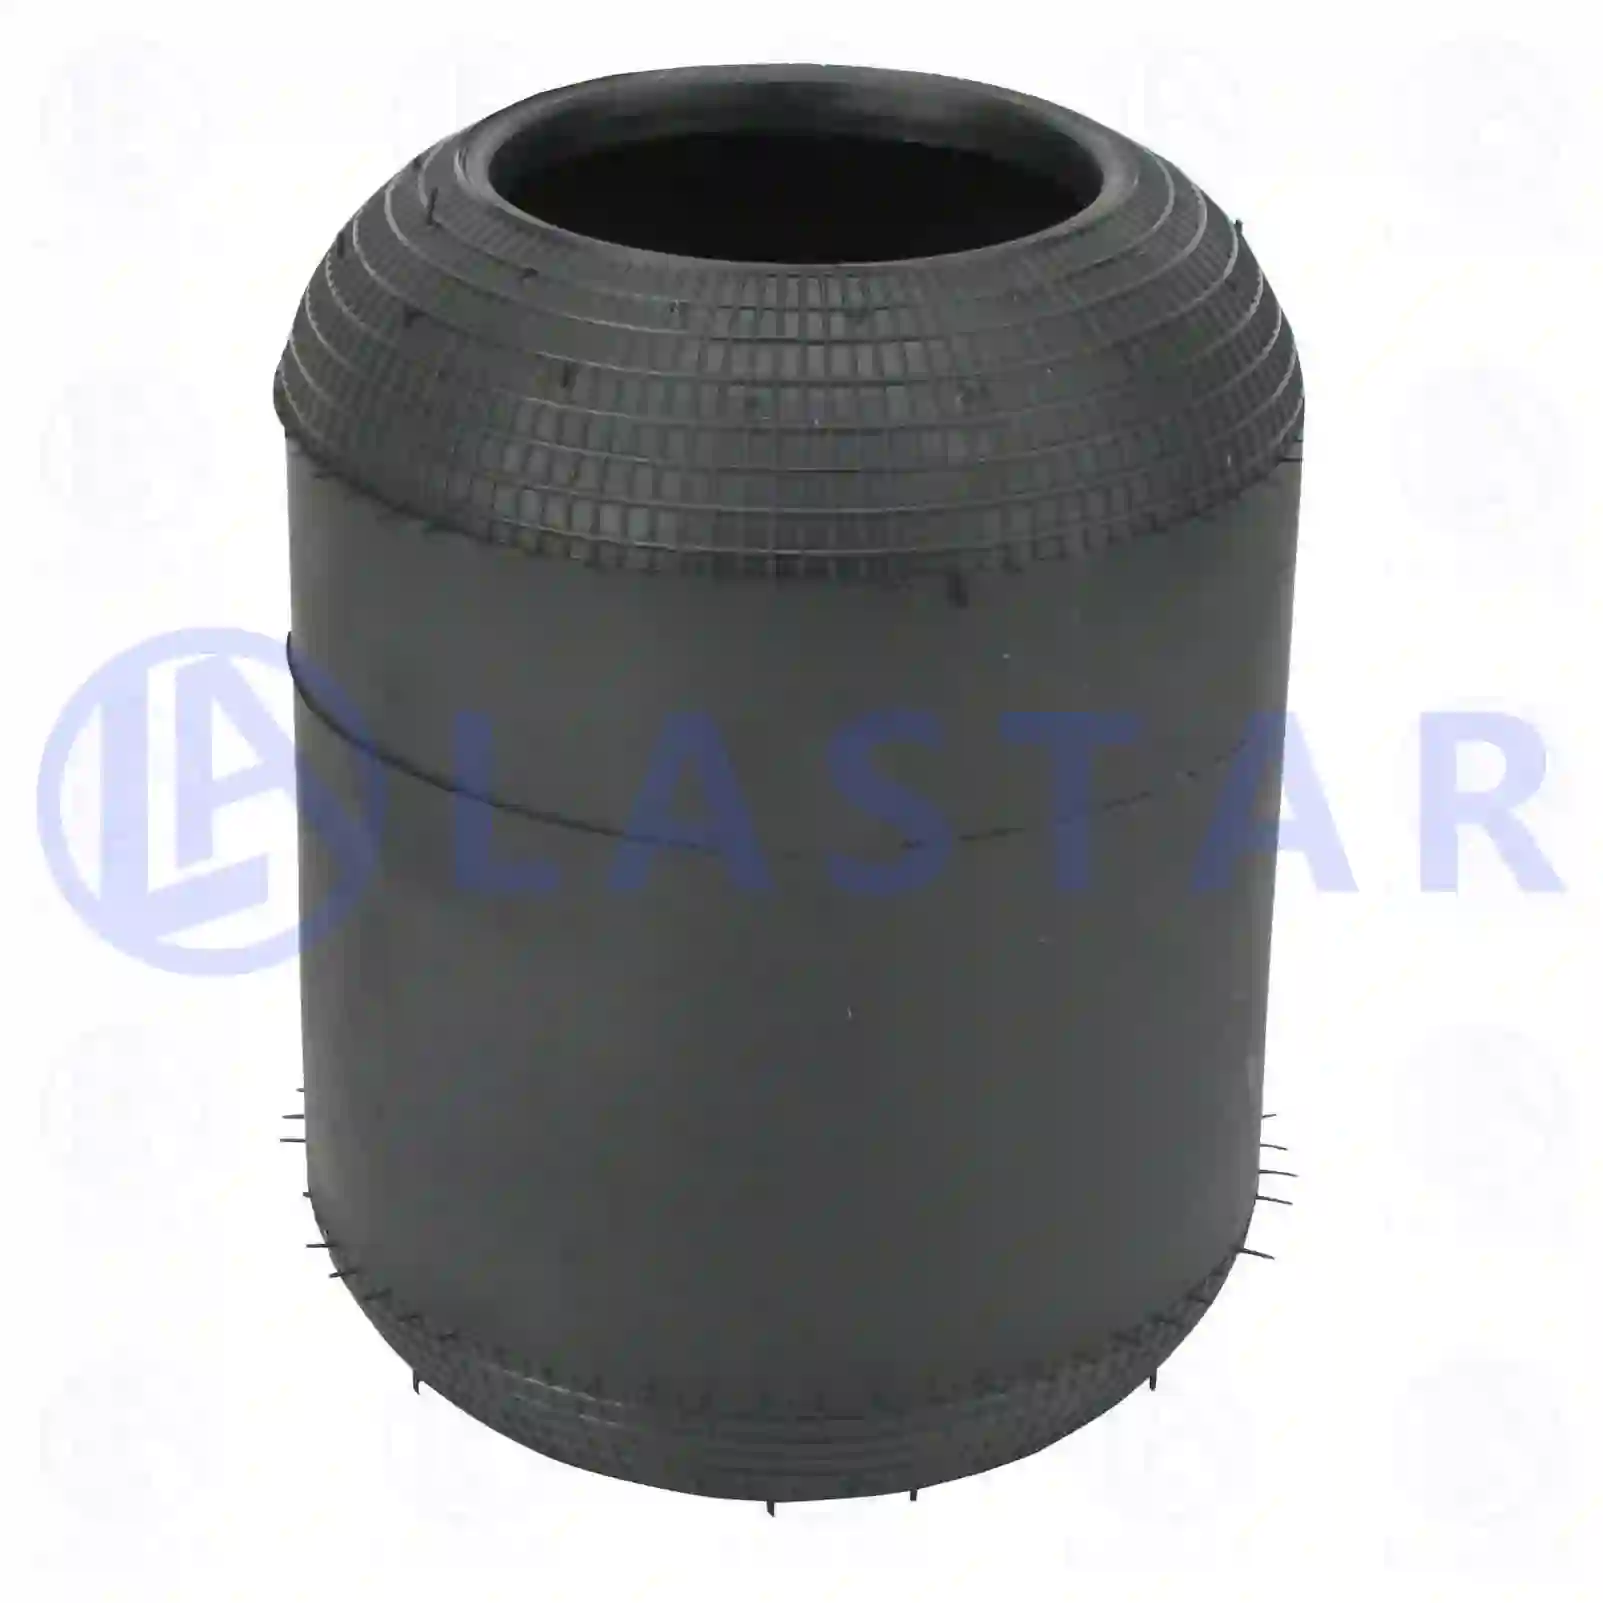 Air spring, without piston, 77729281, 06144040, 08160165, 500055248, 6144040, 8160165 ||  77729281 Lastar Spare Part | Truck Spare Parts, Auotomotive Spare Parts Air spring, without piston, 77729281, 06144040, 08160165, 500055248, 6144040, 8160165 ||  77729281 Lastar Spare Part | Truck Spare Parts, Auotomotive Spare Parts